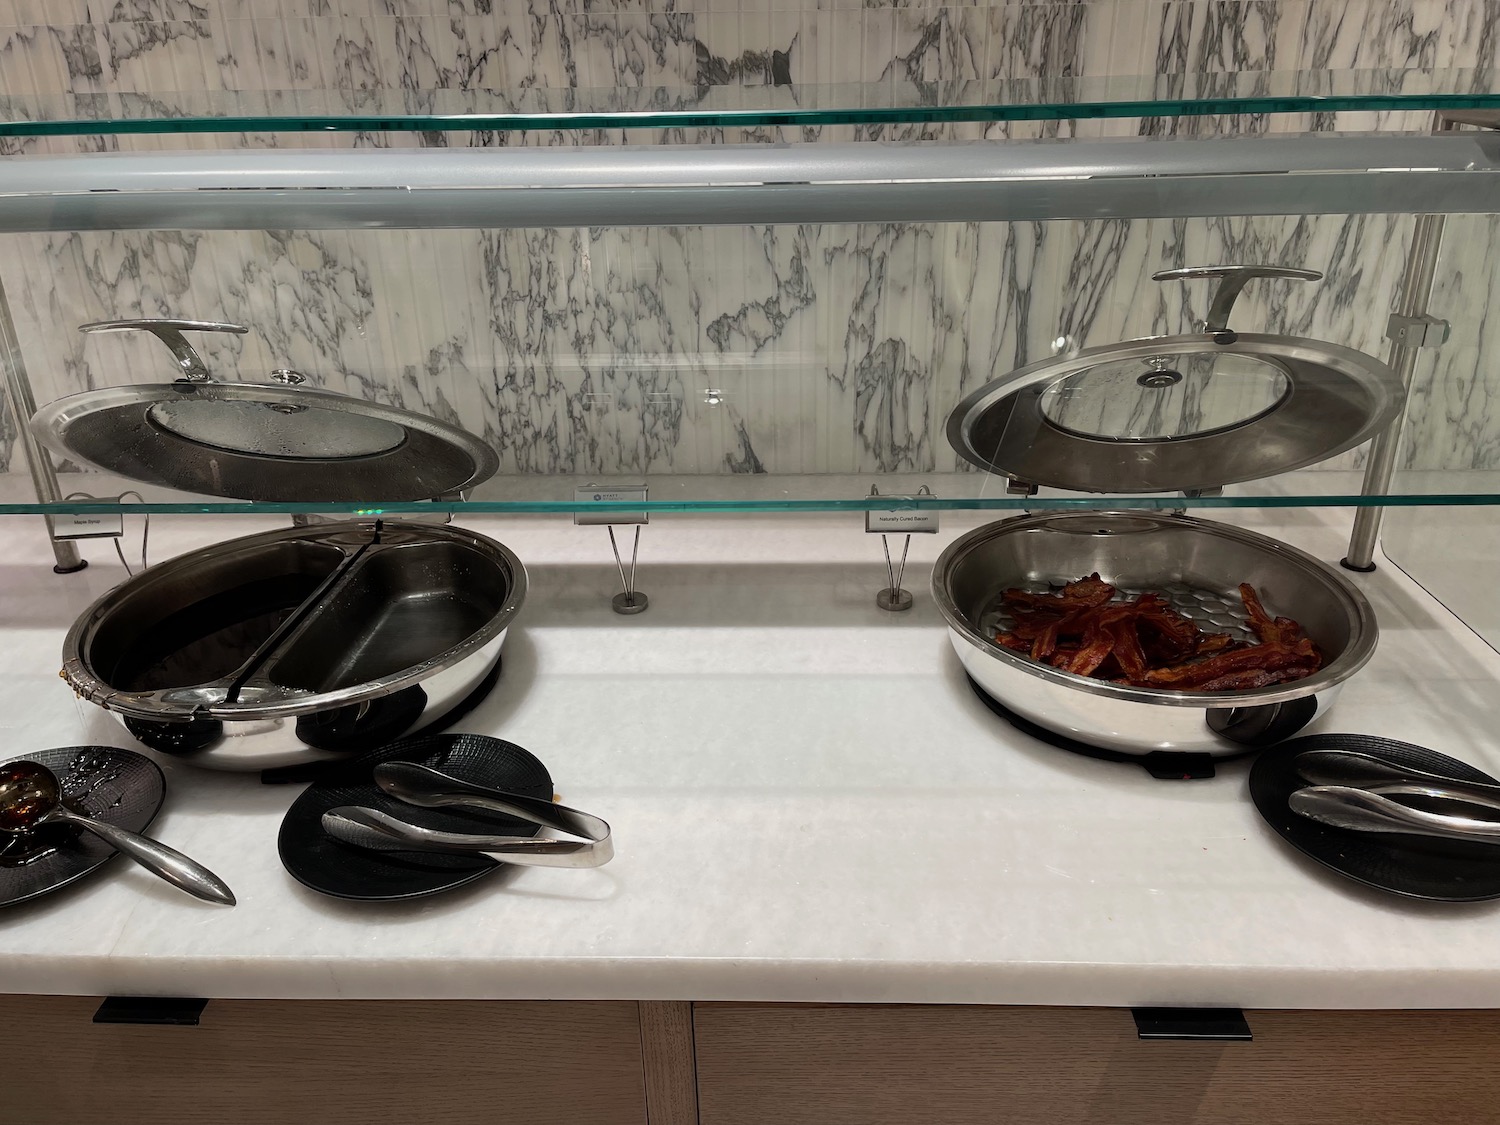 a buffet line with pans and food